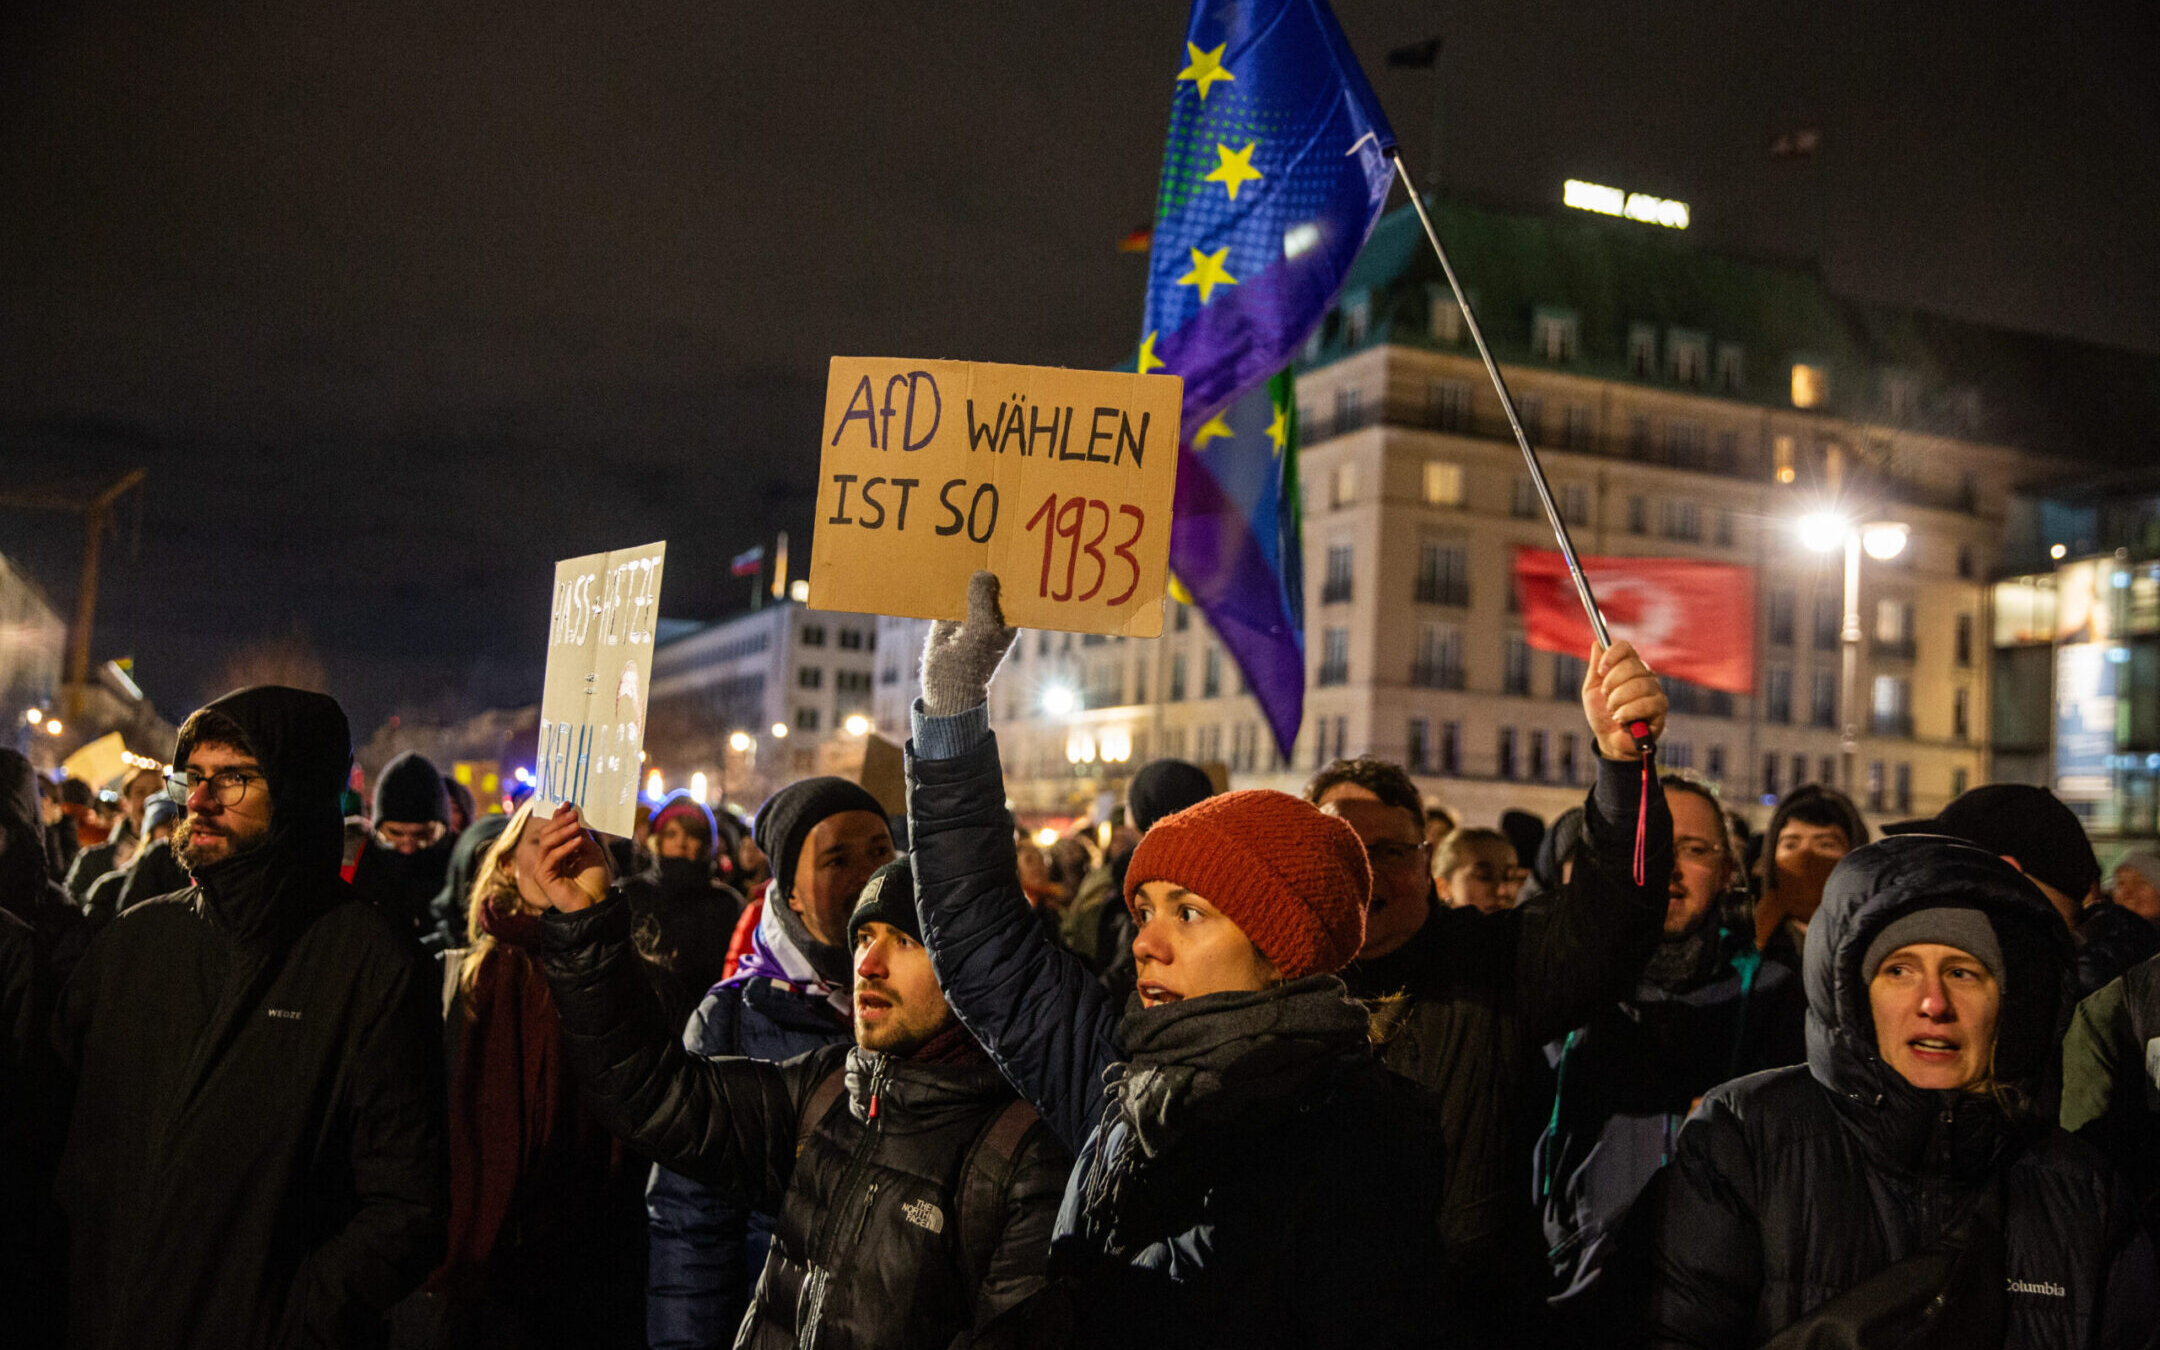 A rally against far-right extremism in Berlin featured signs connecting the plans of a far-right party, AfD, to the plotting of the Nazis against the Jews, Jan. 21, 2024. (Hami Roshan/Middle East Images/AFP via Getty Images)